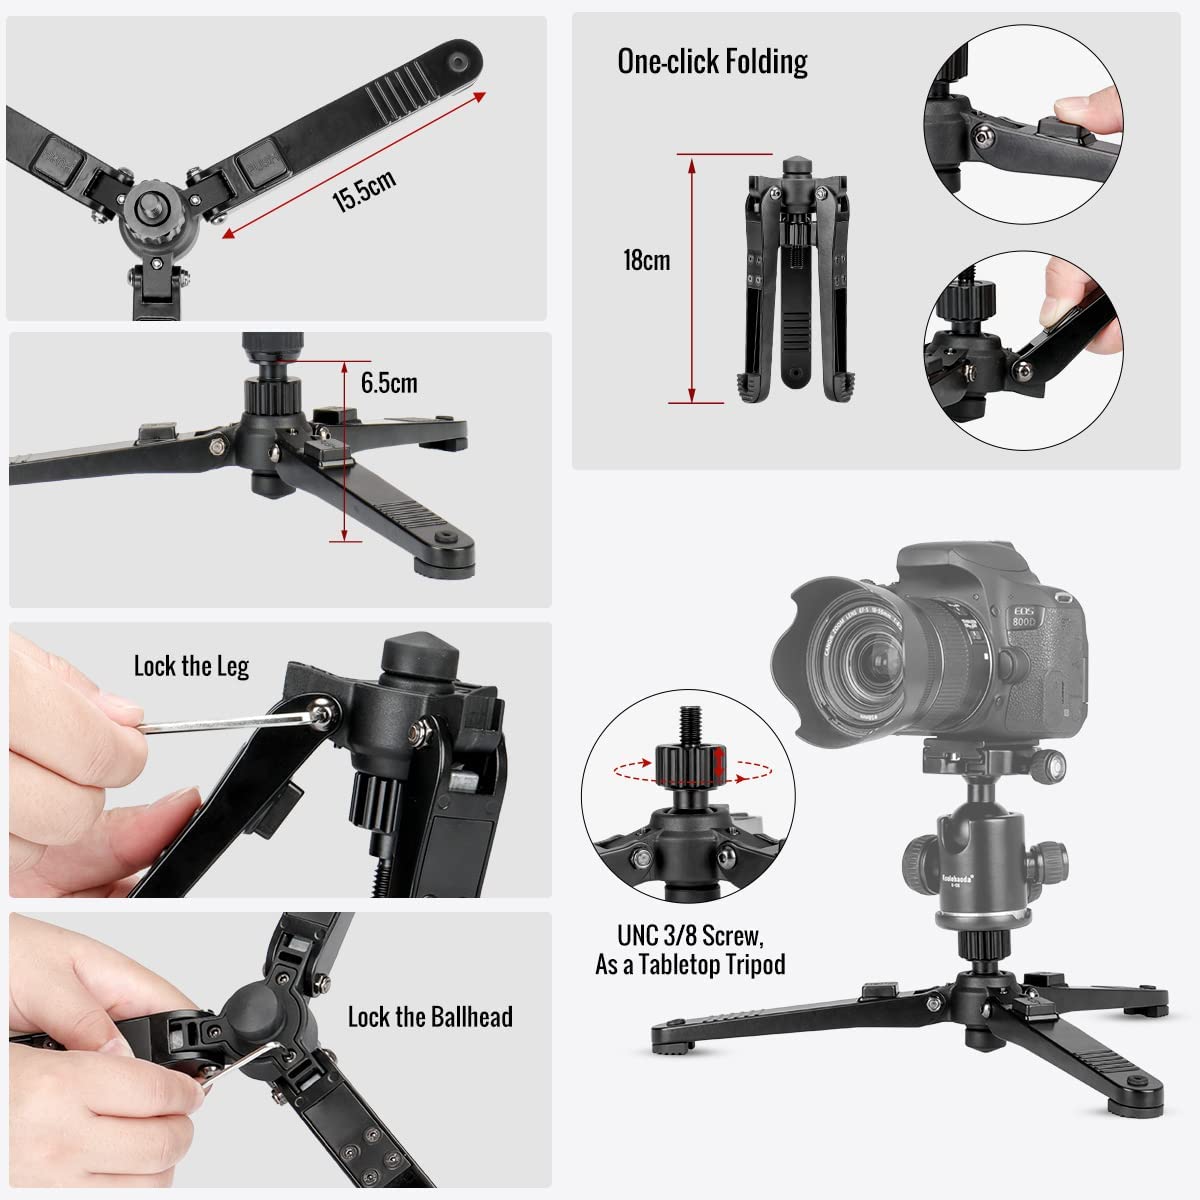 Extendable Aluminum Monopod with Removable Tripod Support Base. Height Adjustable 20 - 67 inches, Payload up to 10kg/22lbs.(MP-325L+M3)